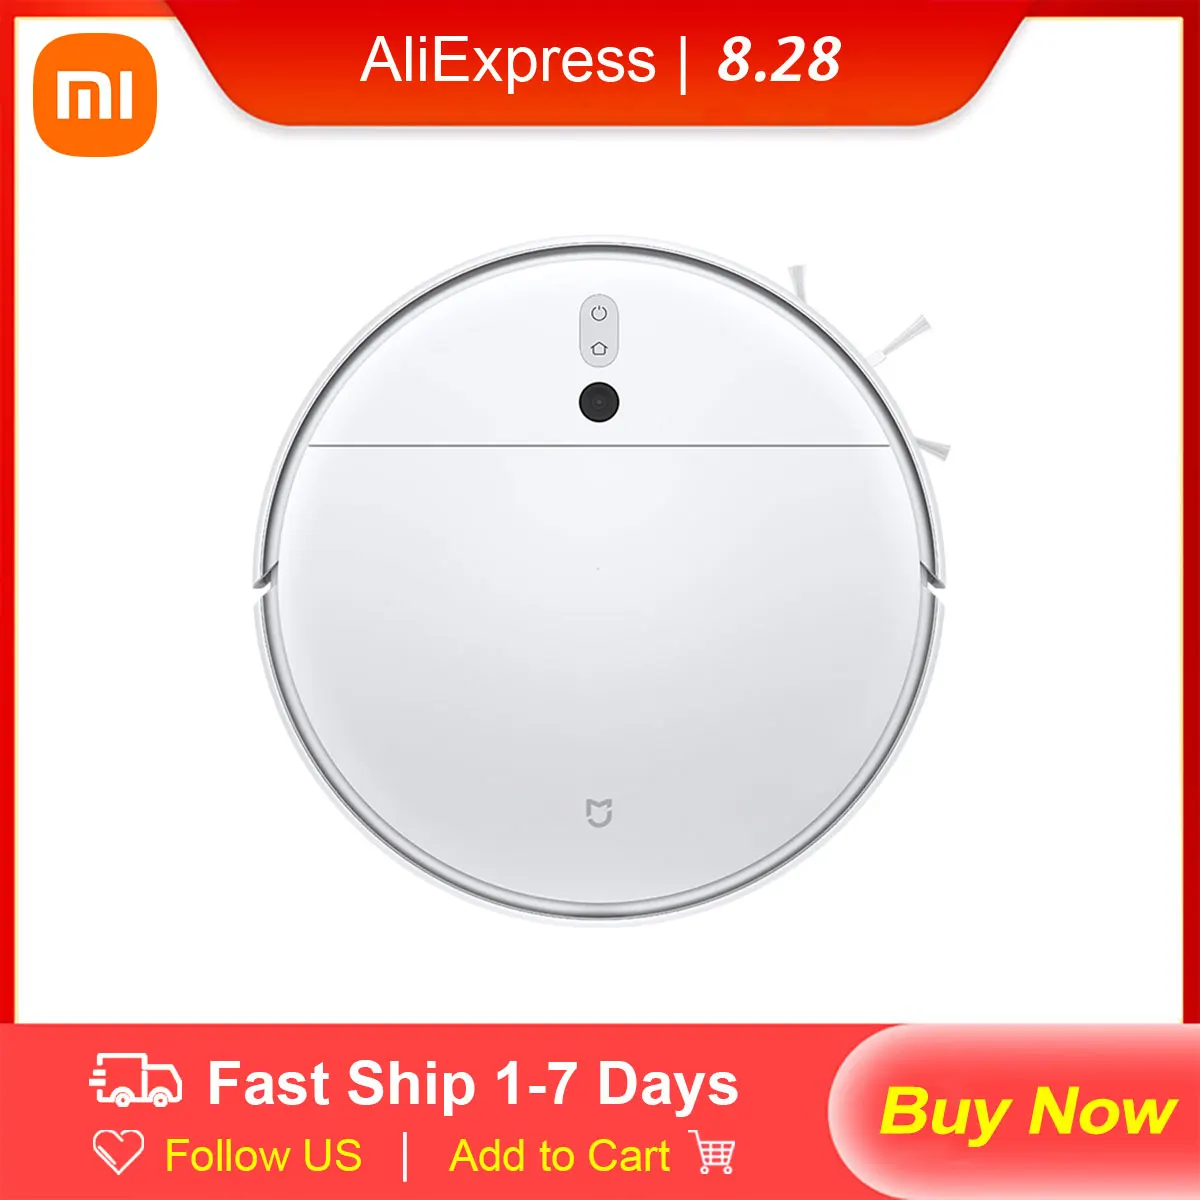 

XIAOMI MIJIA Mop Robot Vacuum Cleaner 2C for Home Auto Sweeping Mopping Dust Sterilize 2700Pa Cyclone Suction Smart Planned App